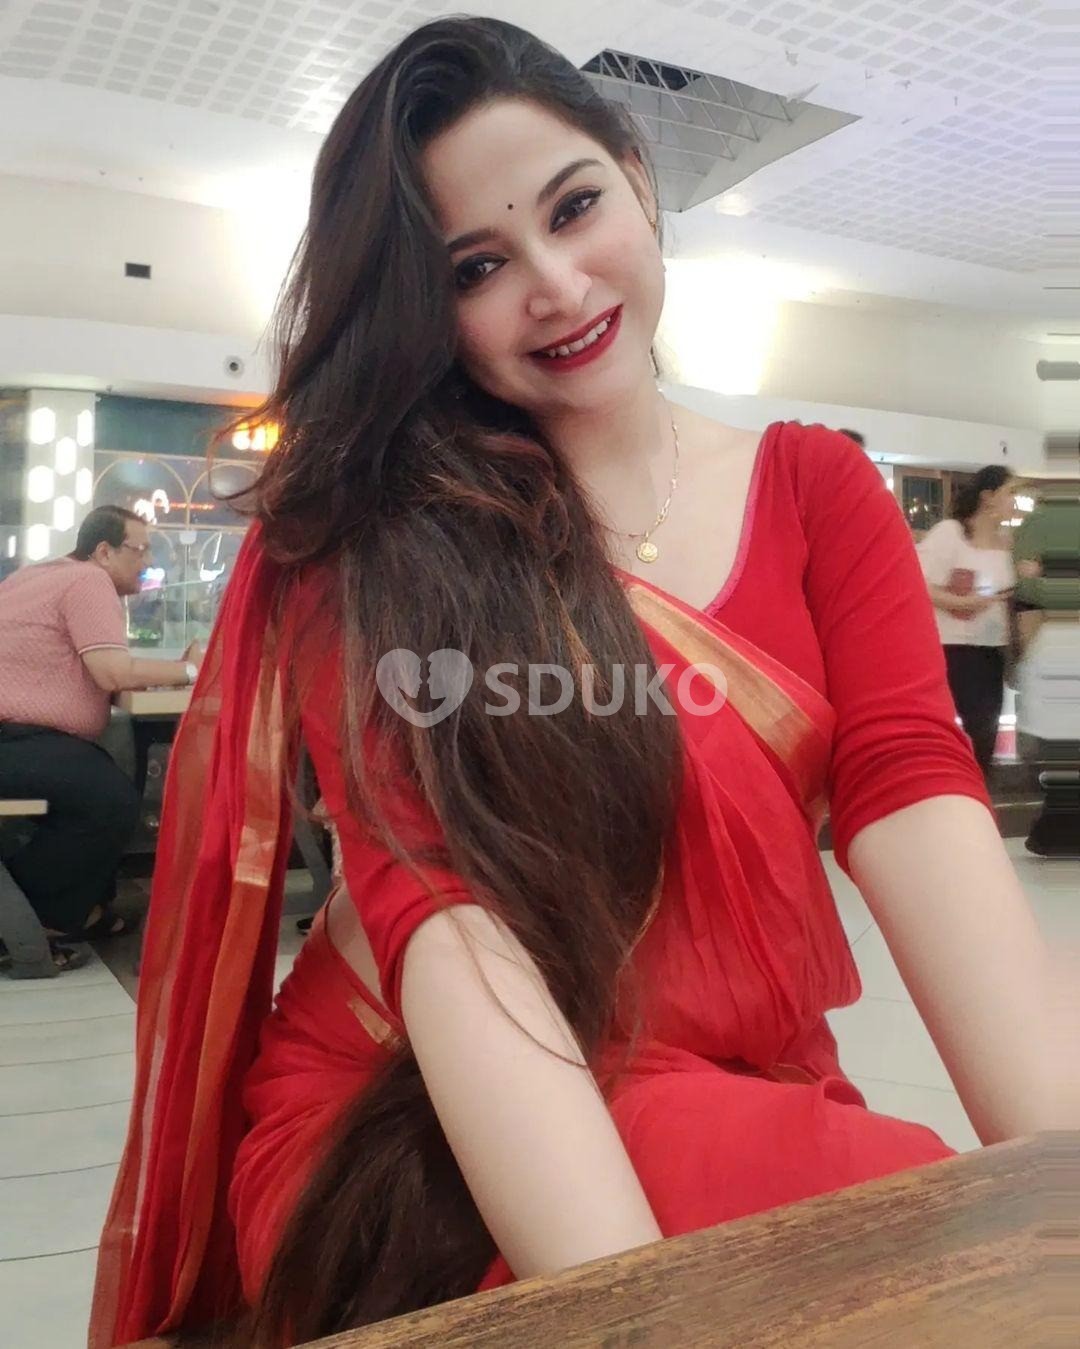 ❣️💞(MODEL TOWN) ❣️💕ROYAL ESCORT SERVICE AVAILABLE 24 × 7 HOURS